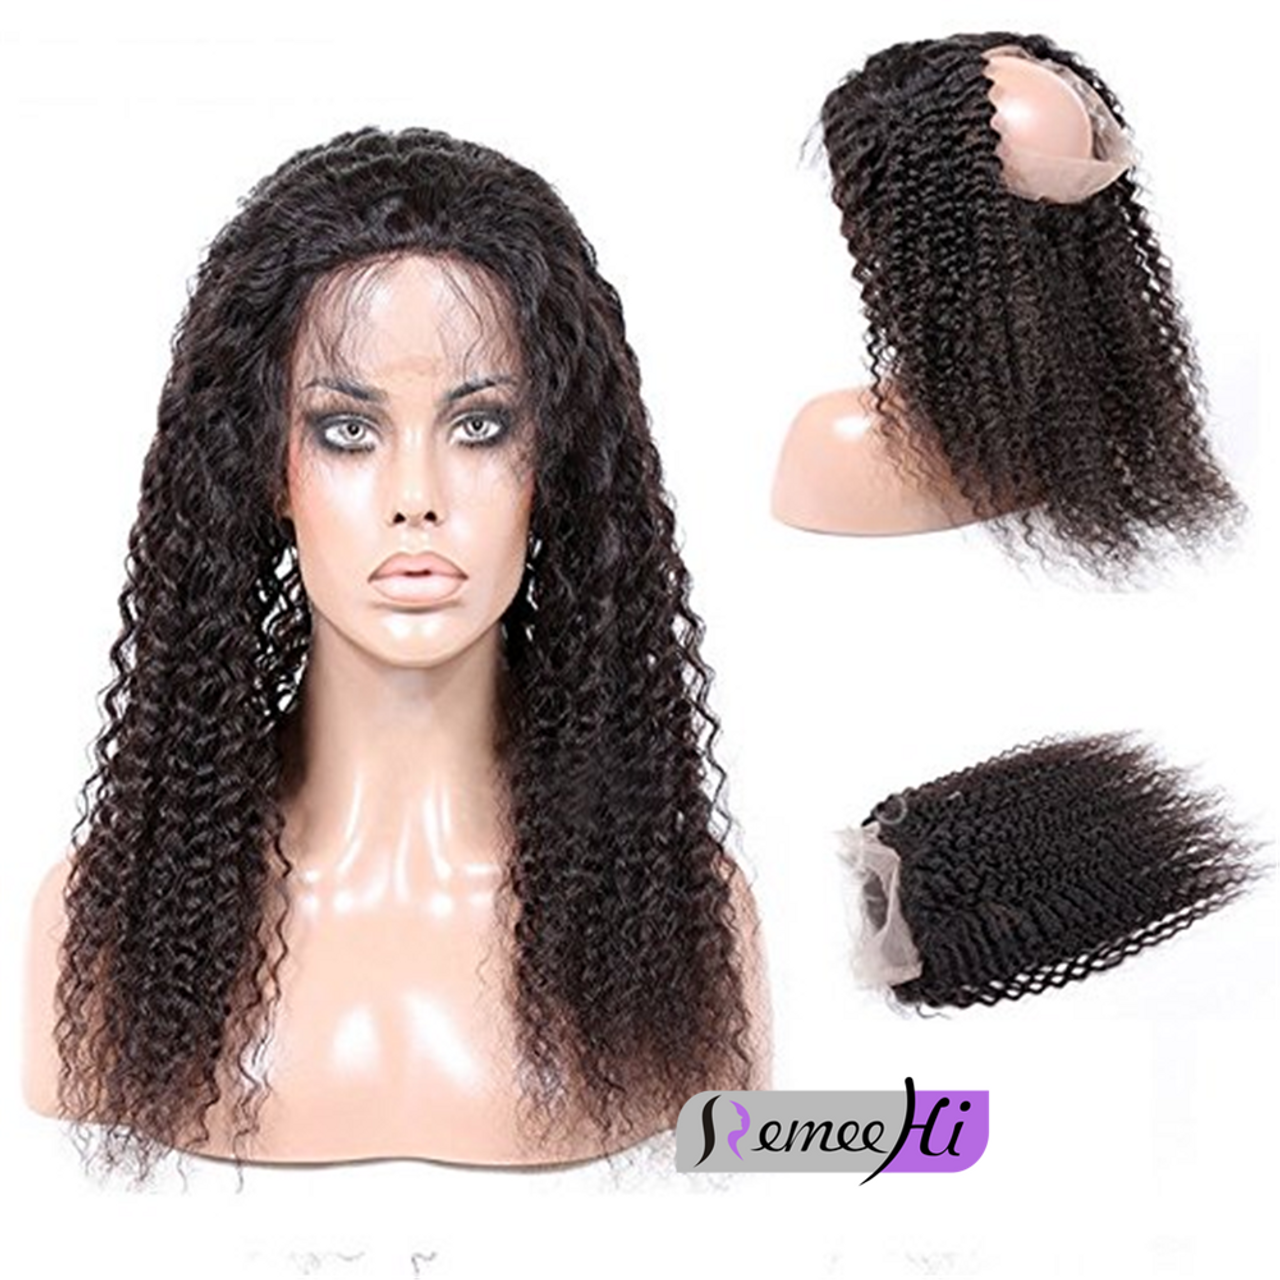 Remeehi Indian Remy Hair Kinky Curly 360 Full Lace Band Frontal